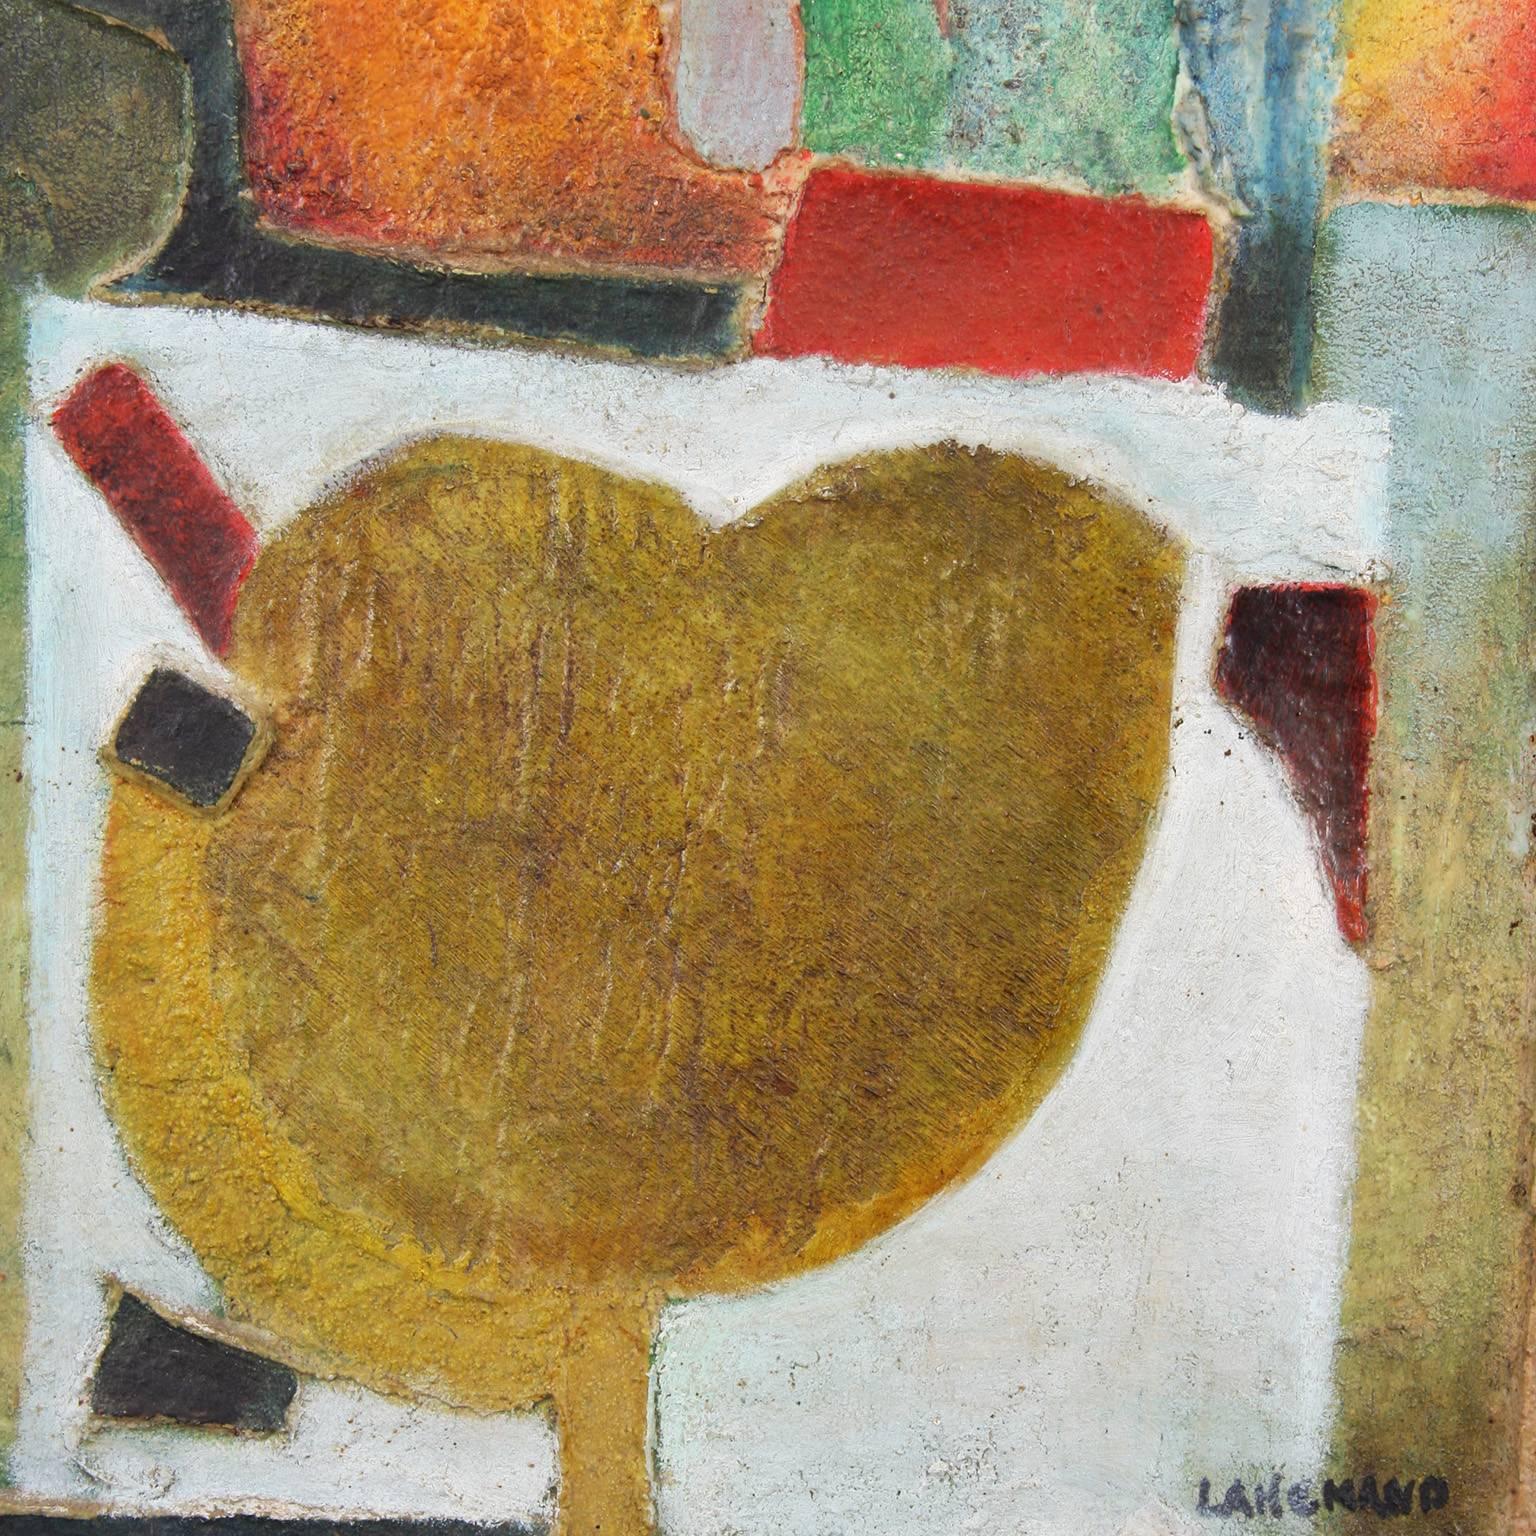 Mid-20th Century 'Untitled' by Lahemand Mixed-Media on Canvas